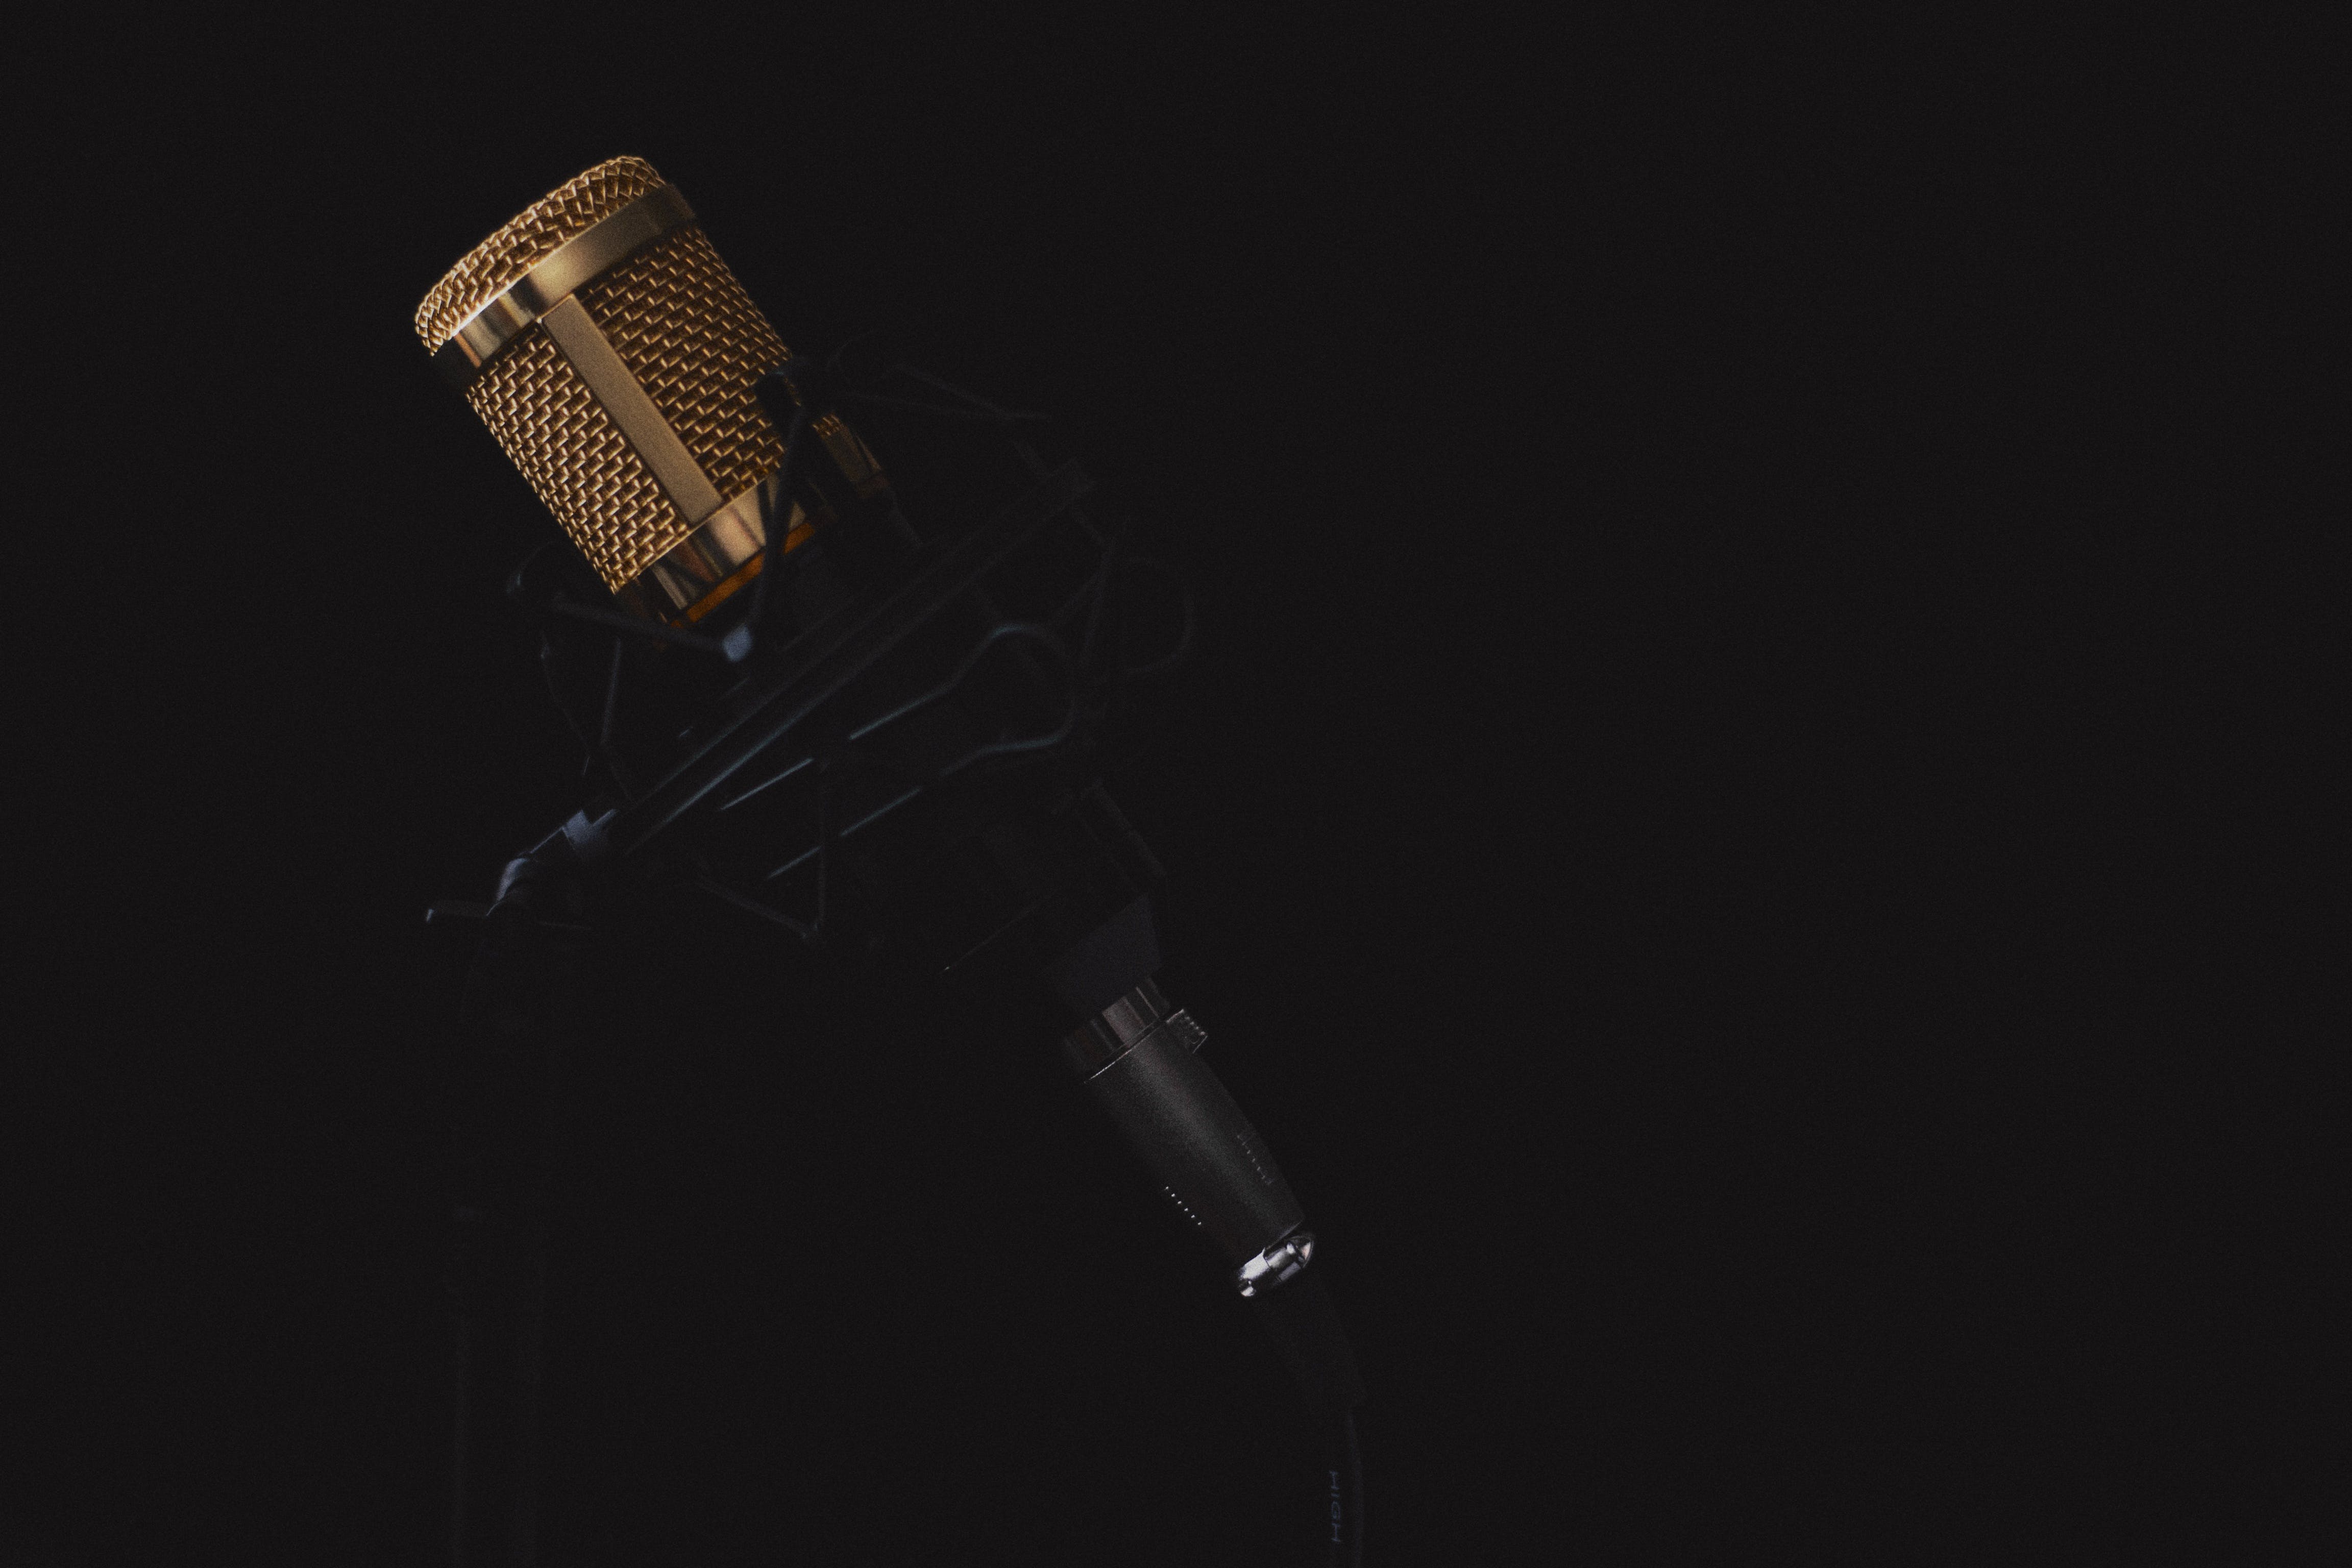 gold-plated microphone on dark background